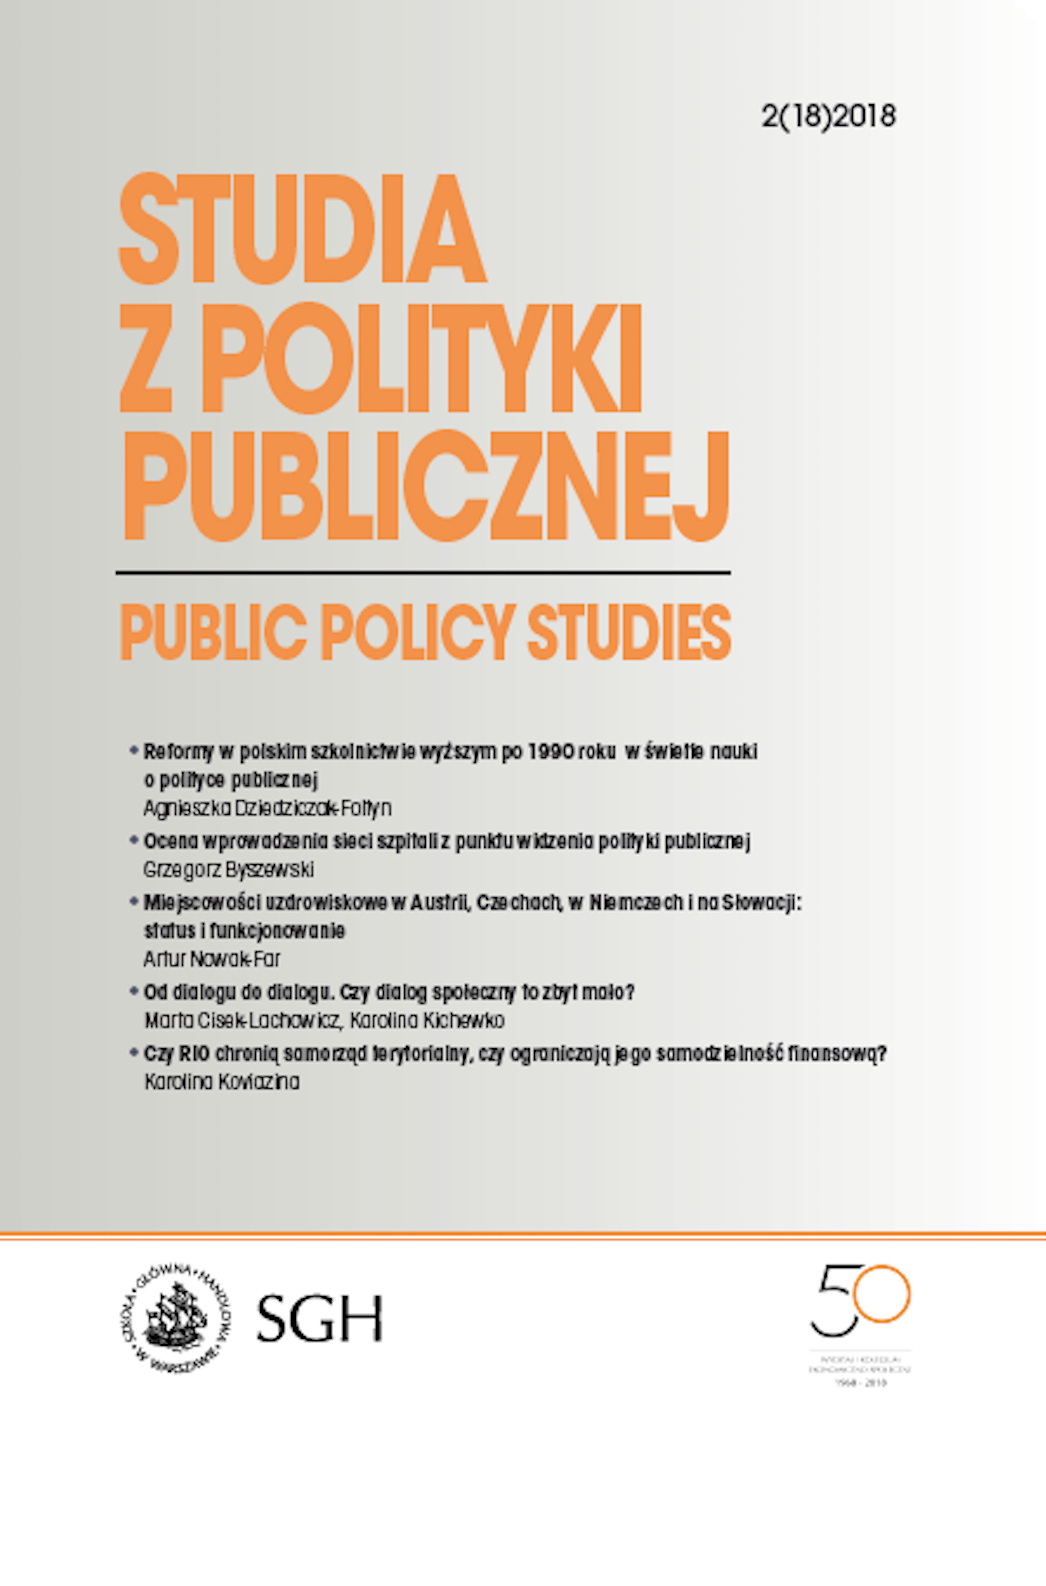 The Long-Term Care Issue in the Agenda of the Policy for Senior Citizens in Poland Cover Image